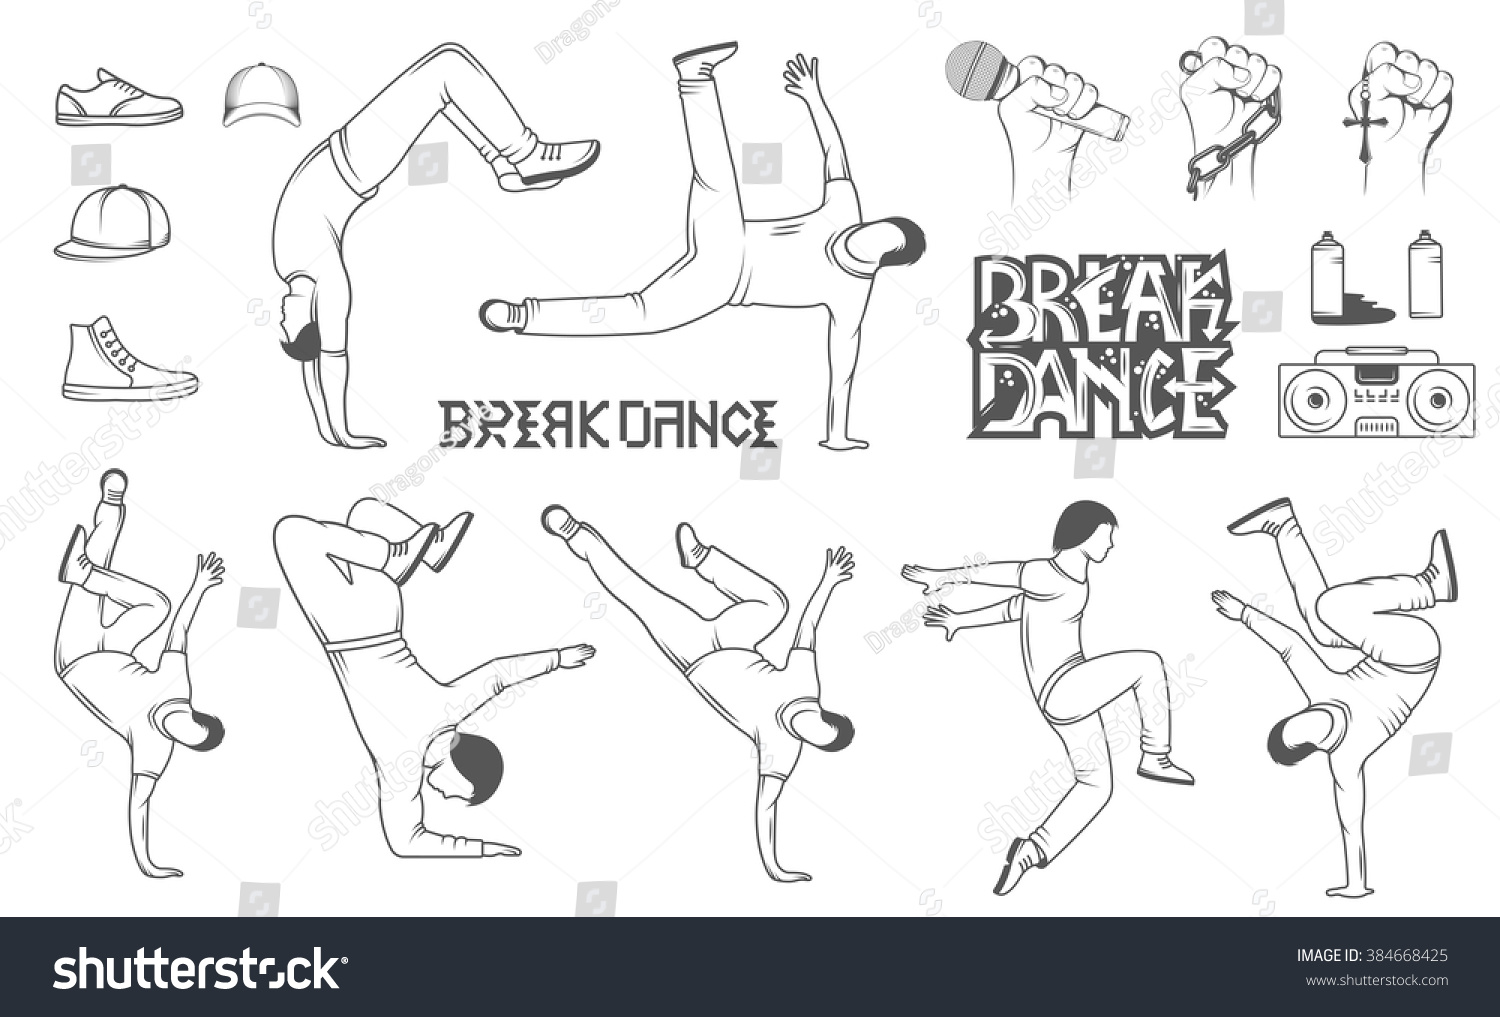 SVG of Break Dance silhouettes man and outfit. Set of Breakdance Bboy Silhouettes in Different Poses. Up, Down, On a Floor, On a Head, Jump, Twist, Rotate. Silhouette of young man dance Hip-hop with graffiti svg